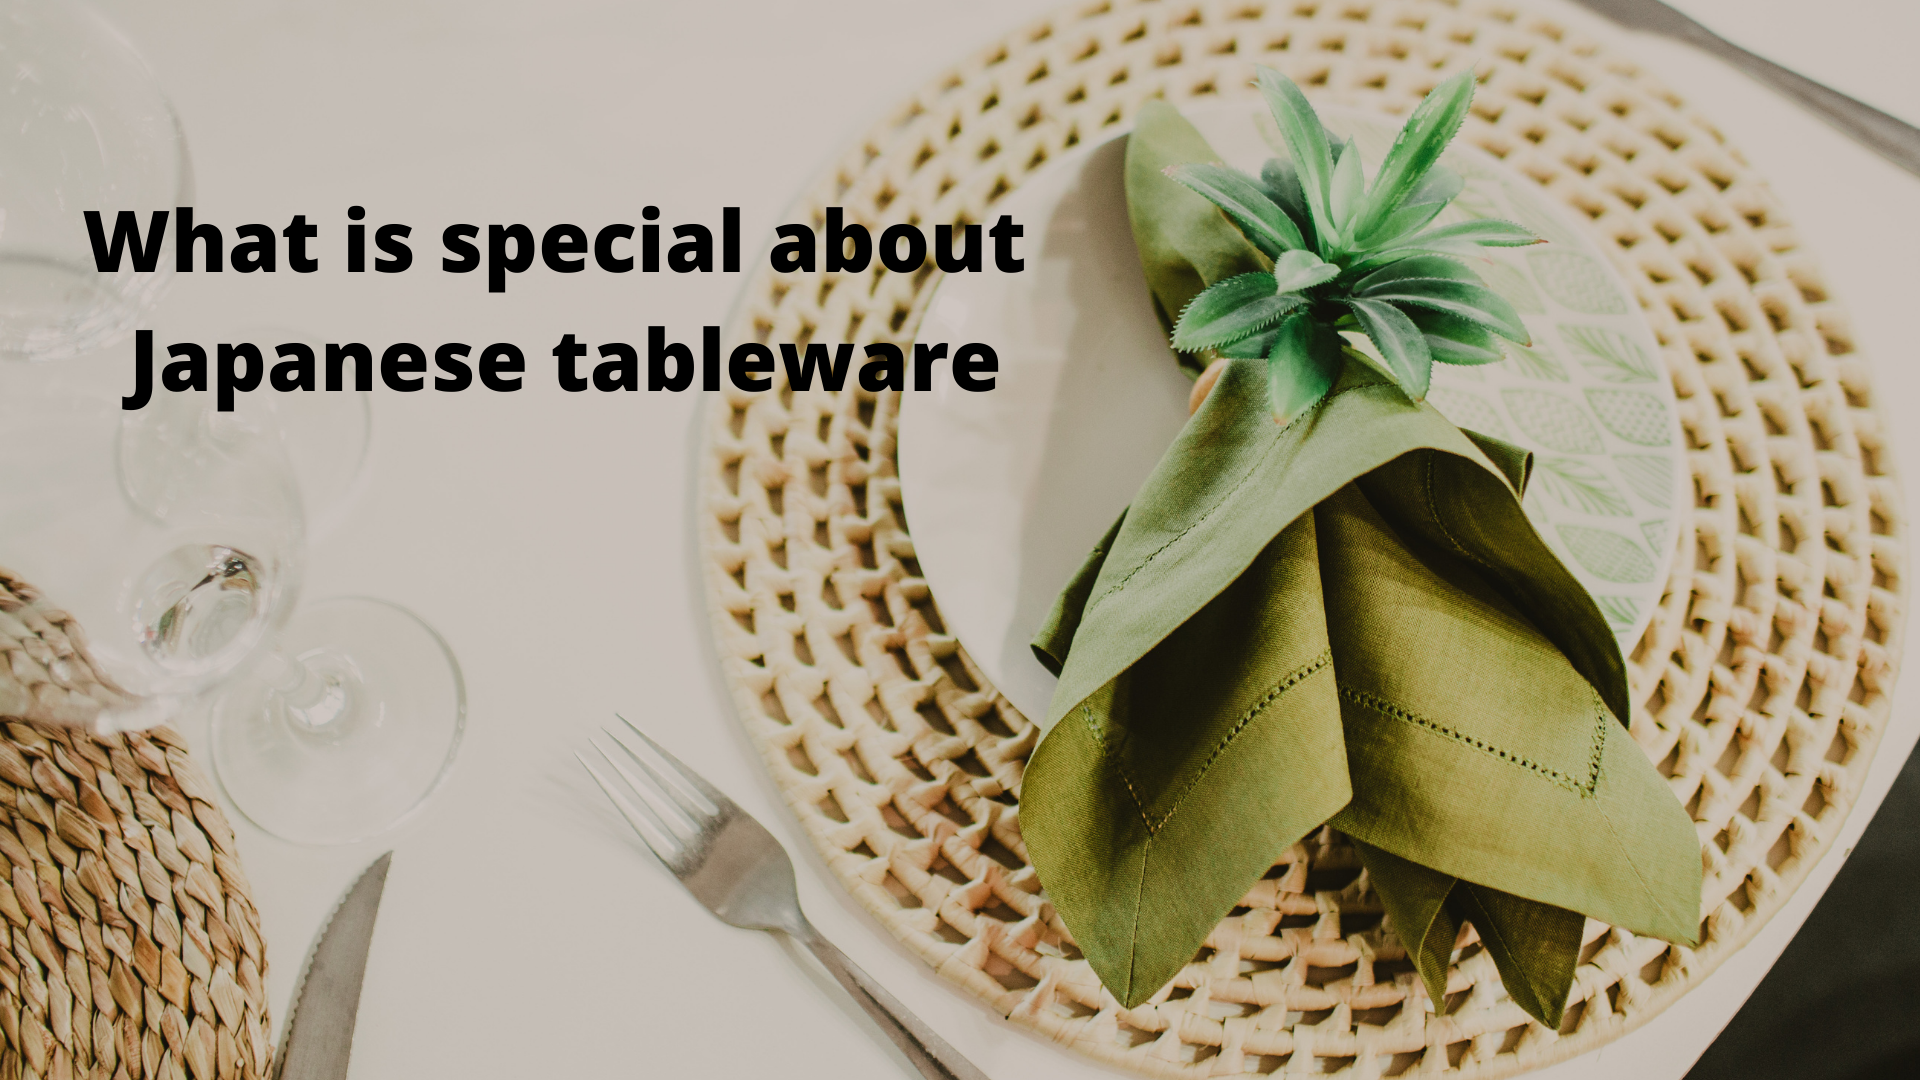 What is special about Japanese tableware